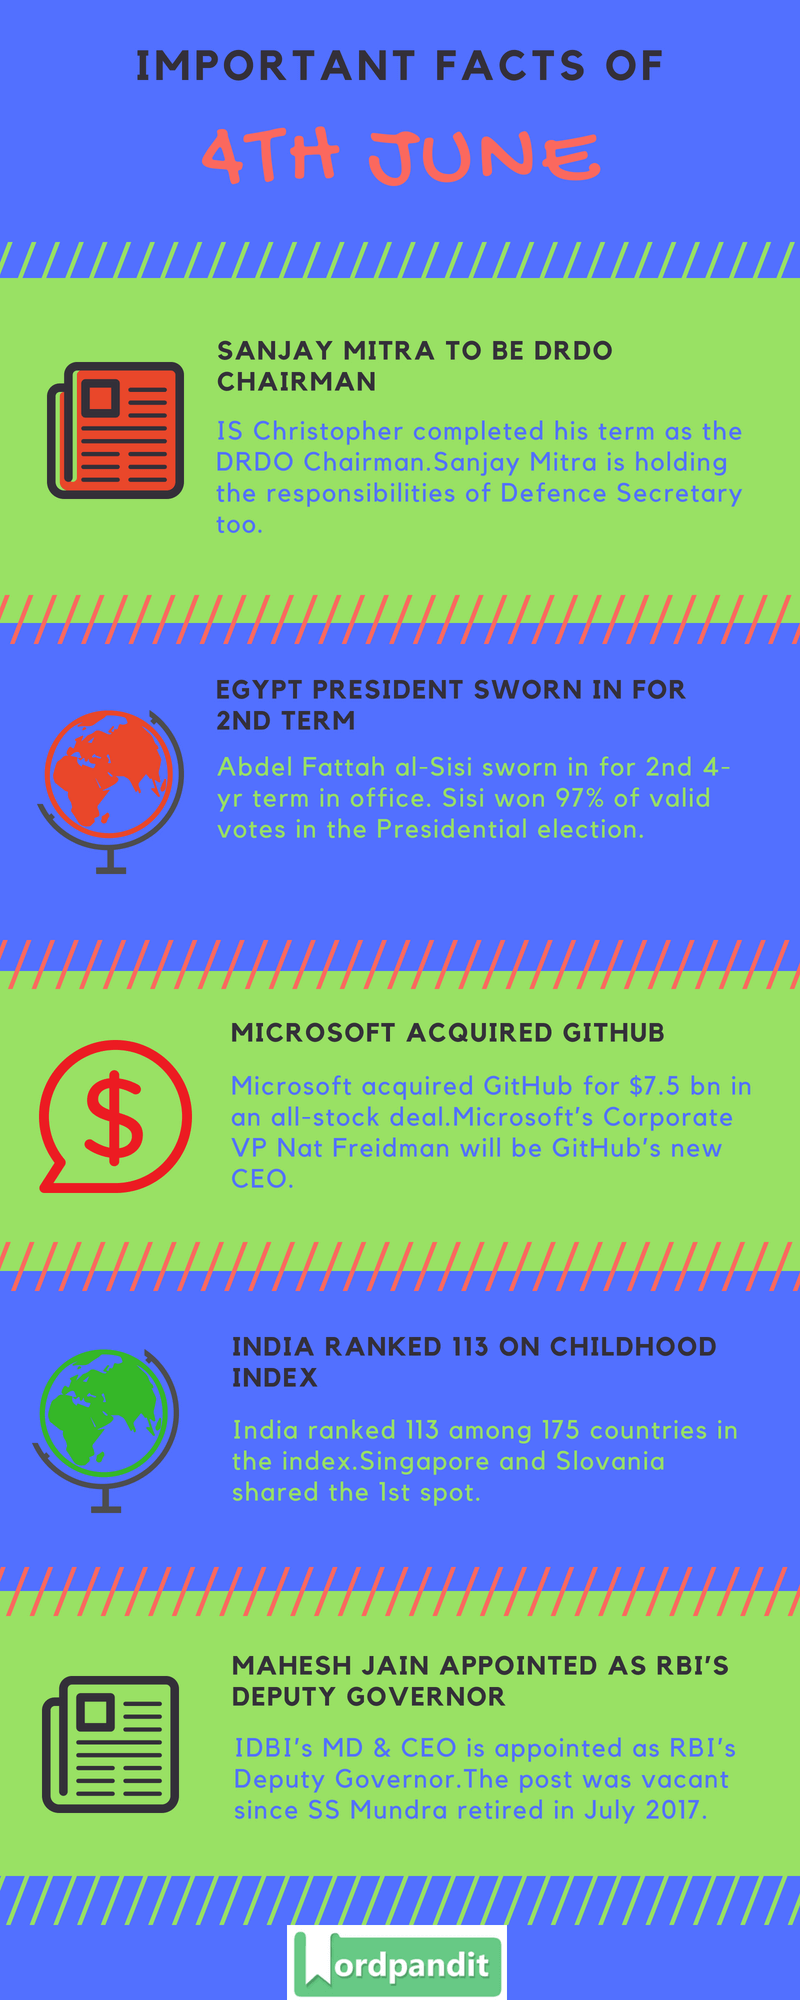 Daily Current Affairs 4 June 2018 Current Affairs Quiz June 1 2018 Current Affairs Infographic